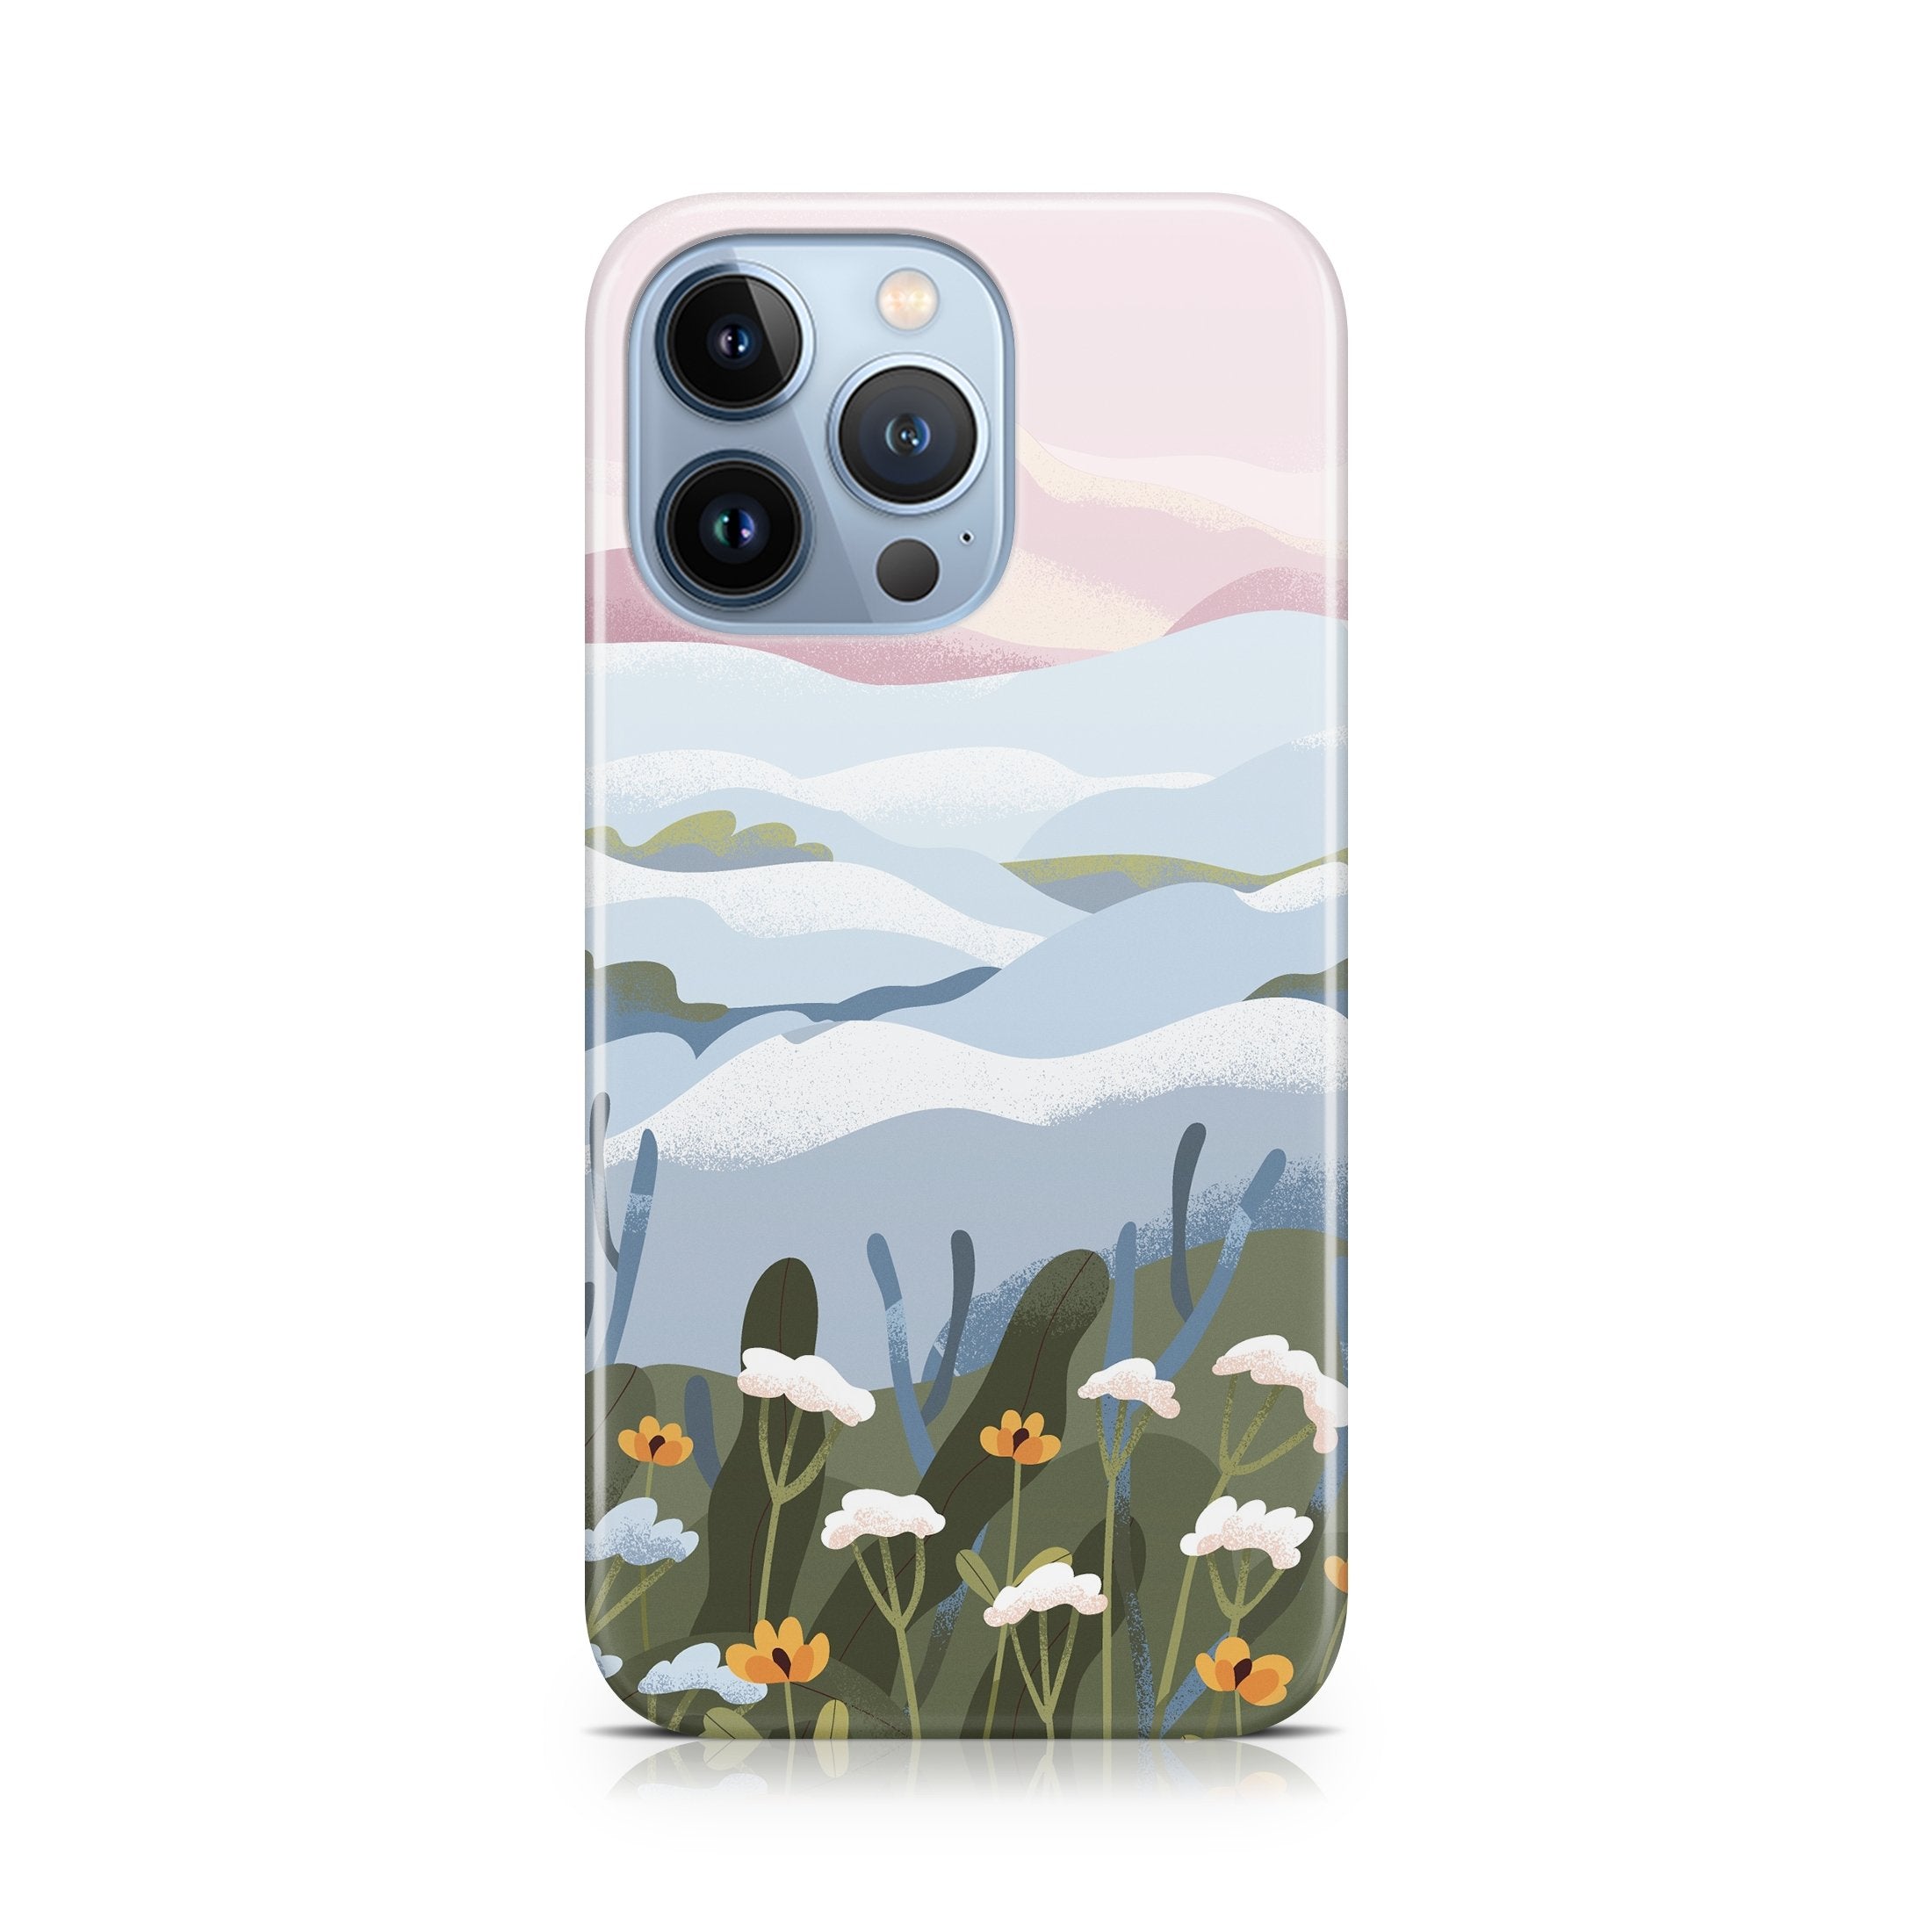 Watercolor Nature - iPhone phone case designs by CaseSwagger